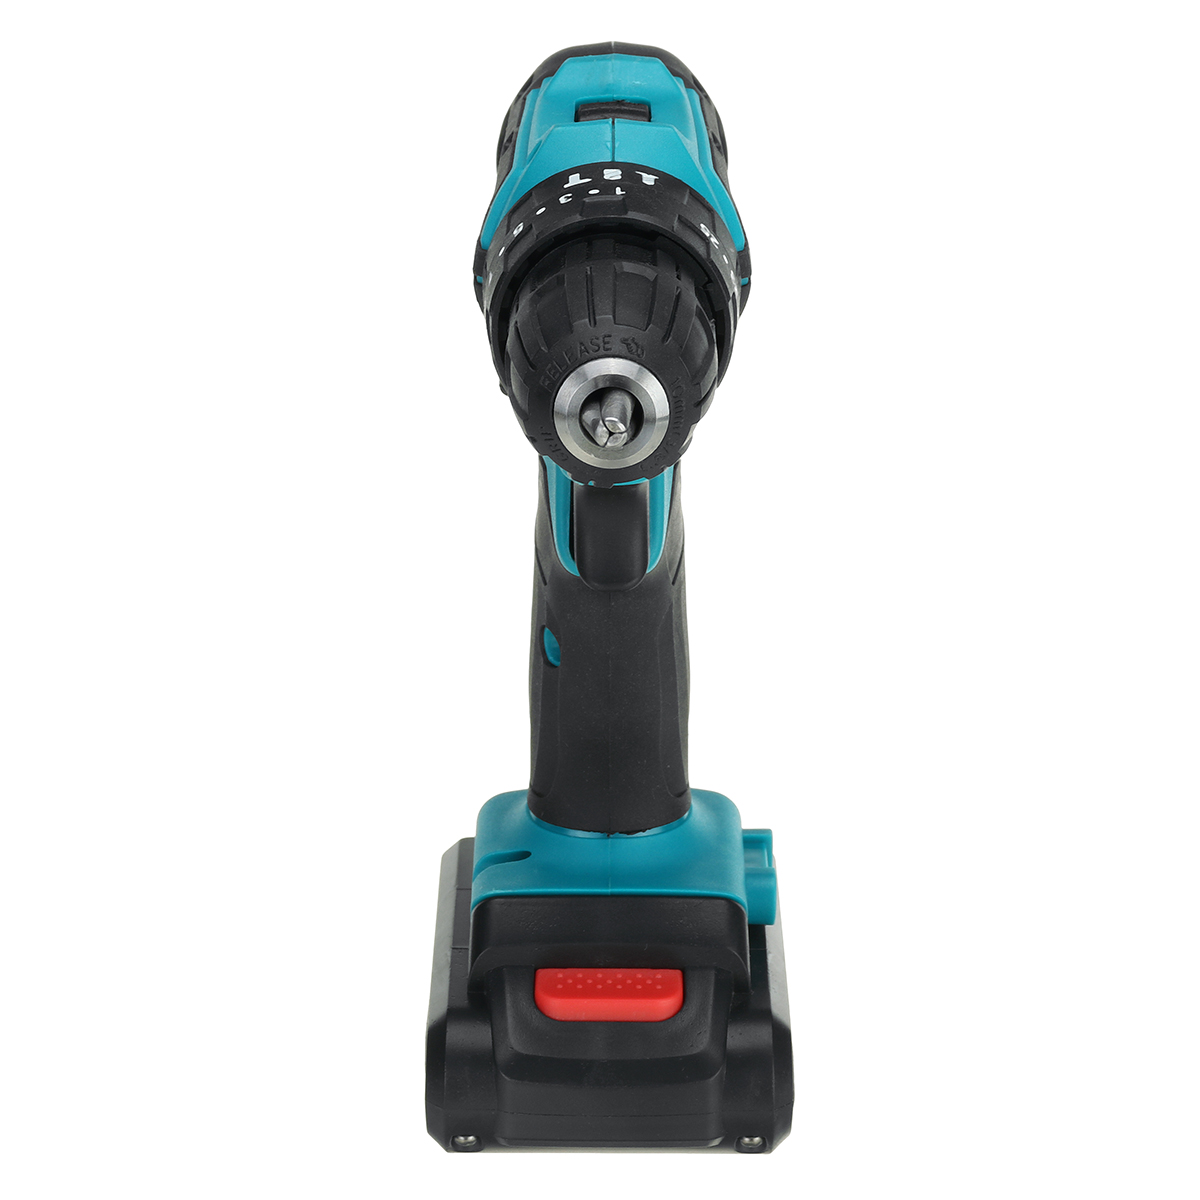 2-Speed-Power-Drills-6000mah-Cordless-Drill-3-IN-1-Electric-Screwdriver-Hammer-Drill-with-2pcs-Batte-1416071-9